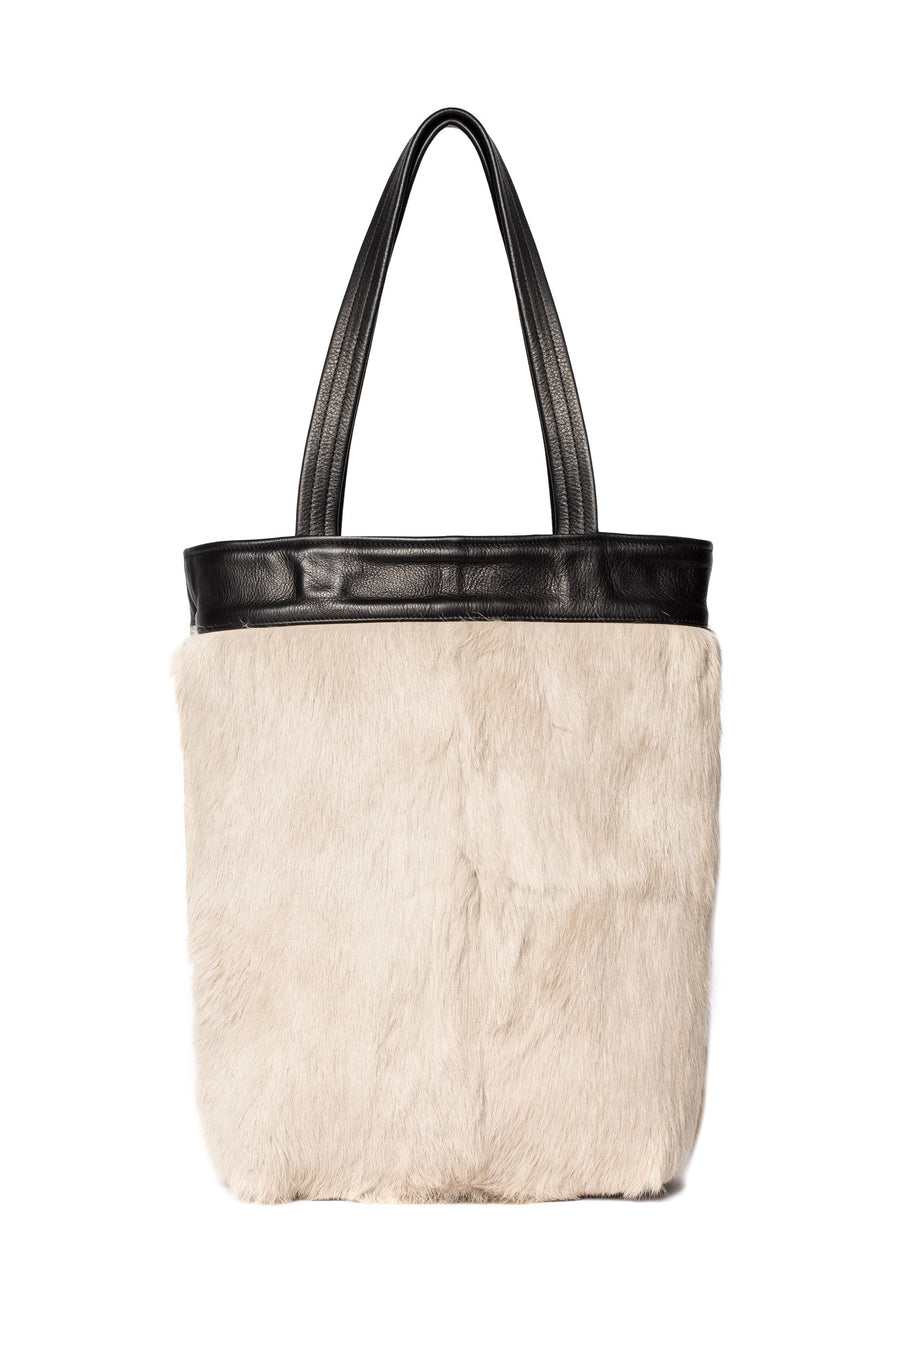 Cream Off White One-of-a-Kind Black Rabbit Fur Tote Black Leather Wendy Nichol Luxury Handbag Purse Bag Designer handmade in NYC New York City one of a kind Durable Handle strap Interior Pocket High Quality Leather